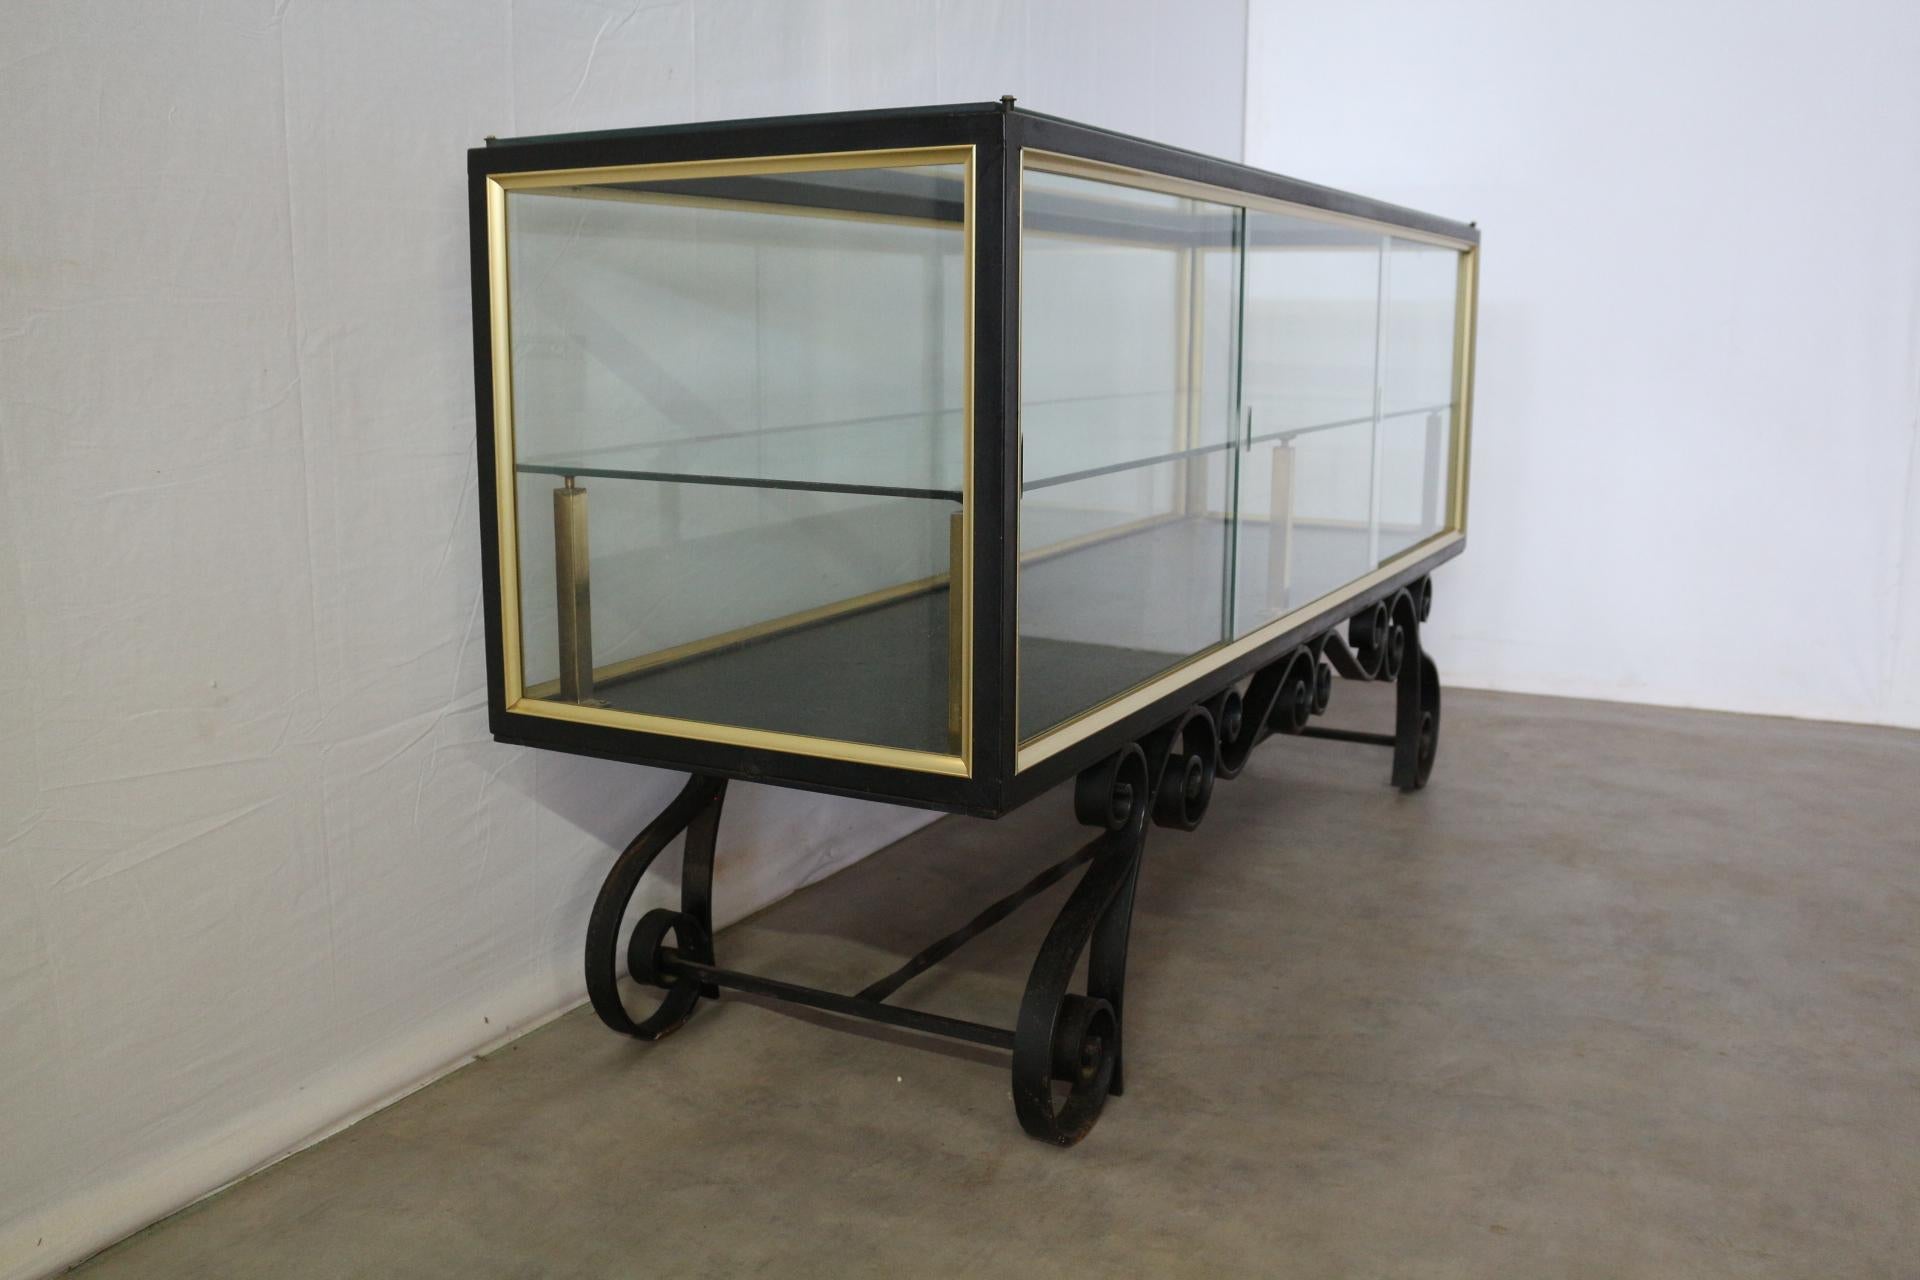 20th Century Midcentury Shop Counter Vitrine Display Cabinet French Glass Wrought Iron